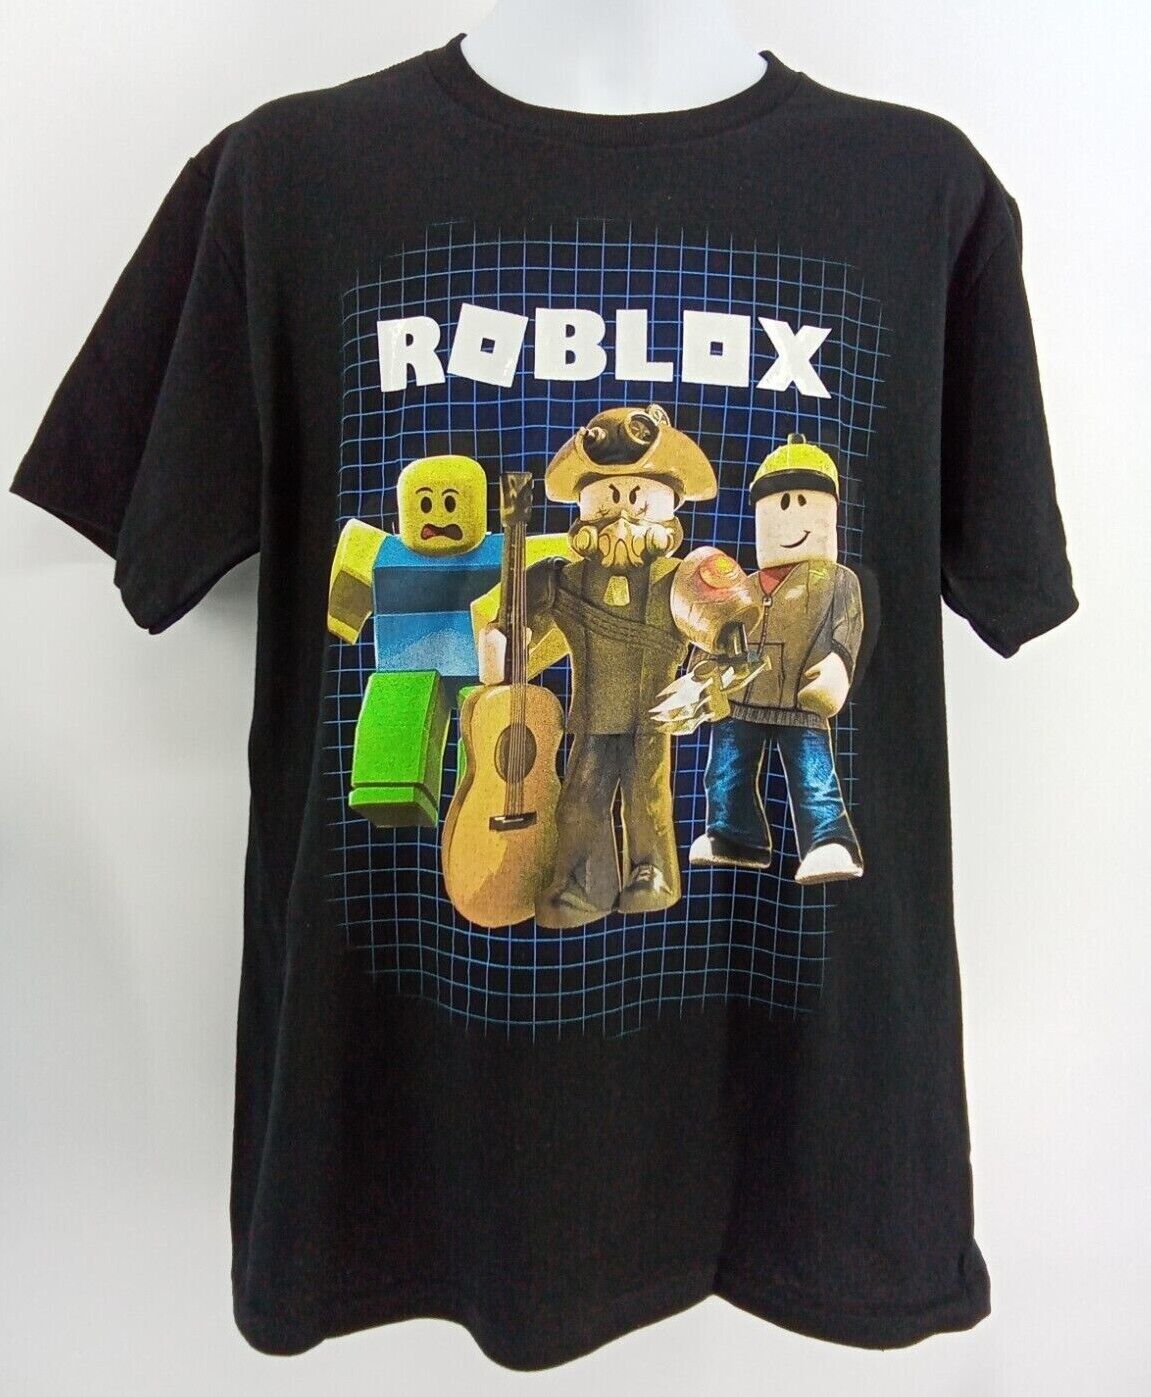 Roblox Boys Short Sleeve T-Shirt Officially Licensed Black X-Small 4/5